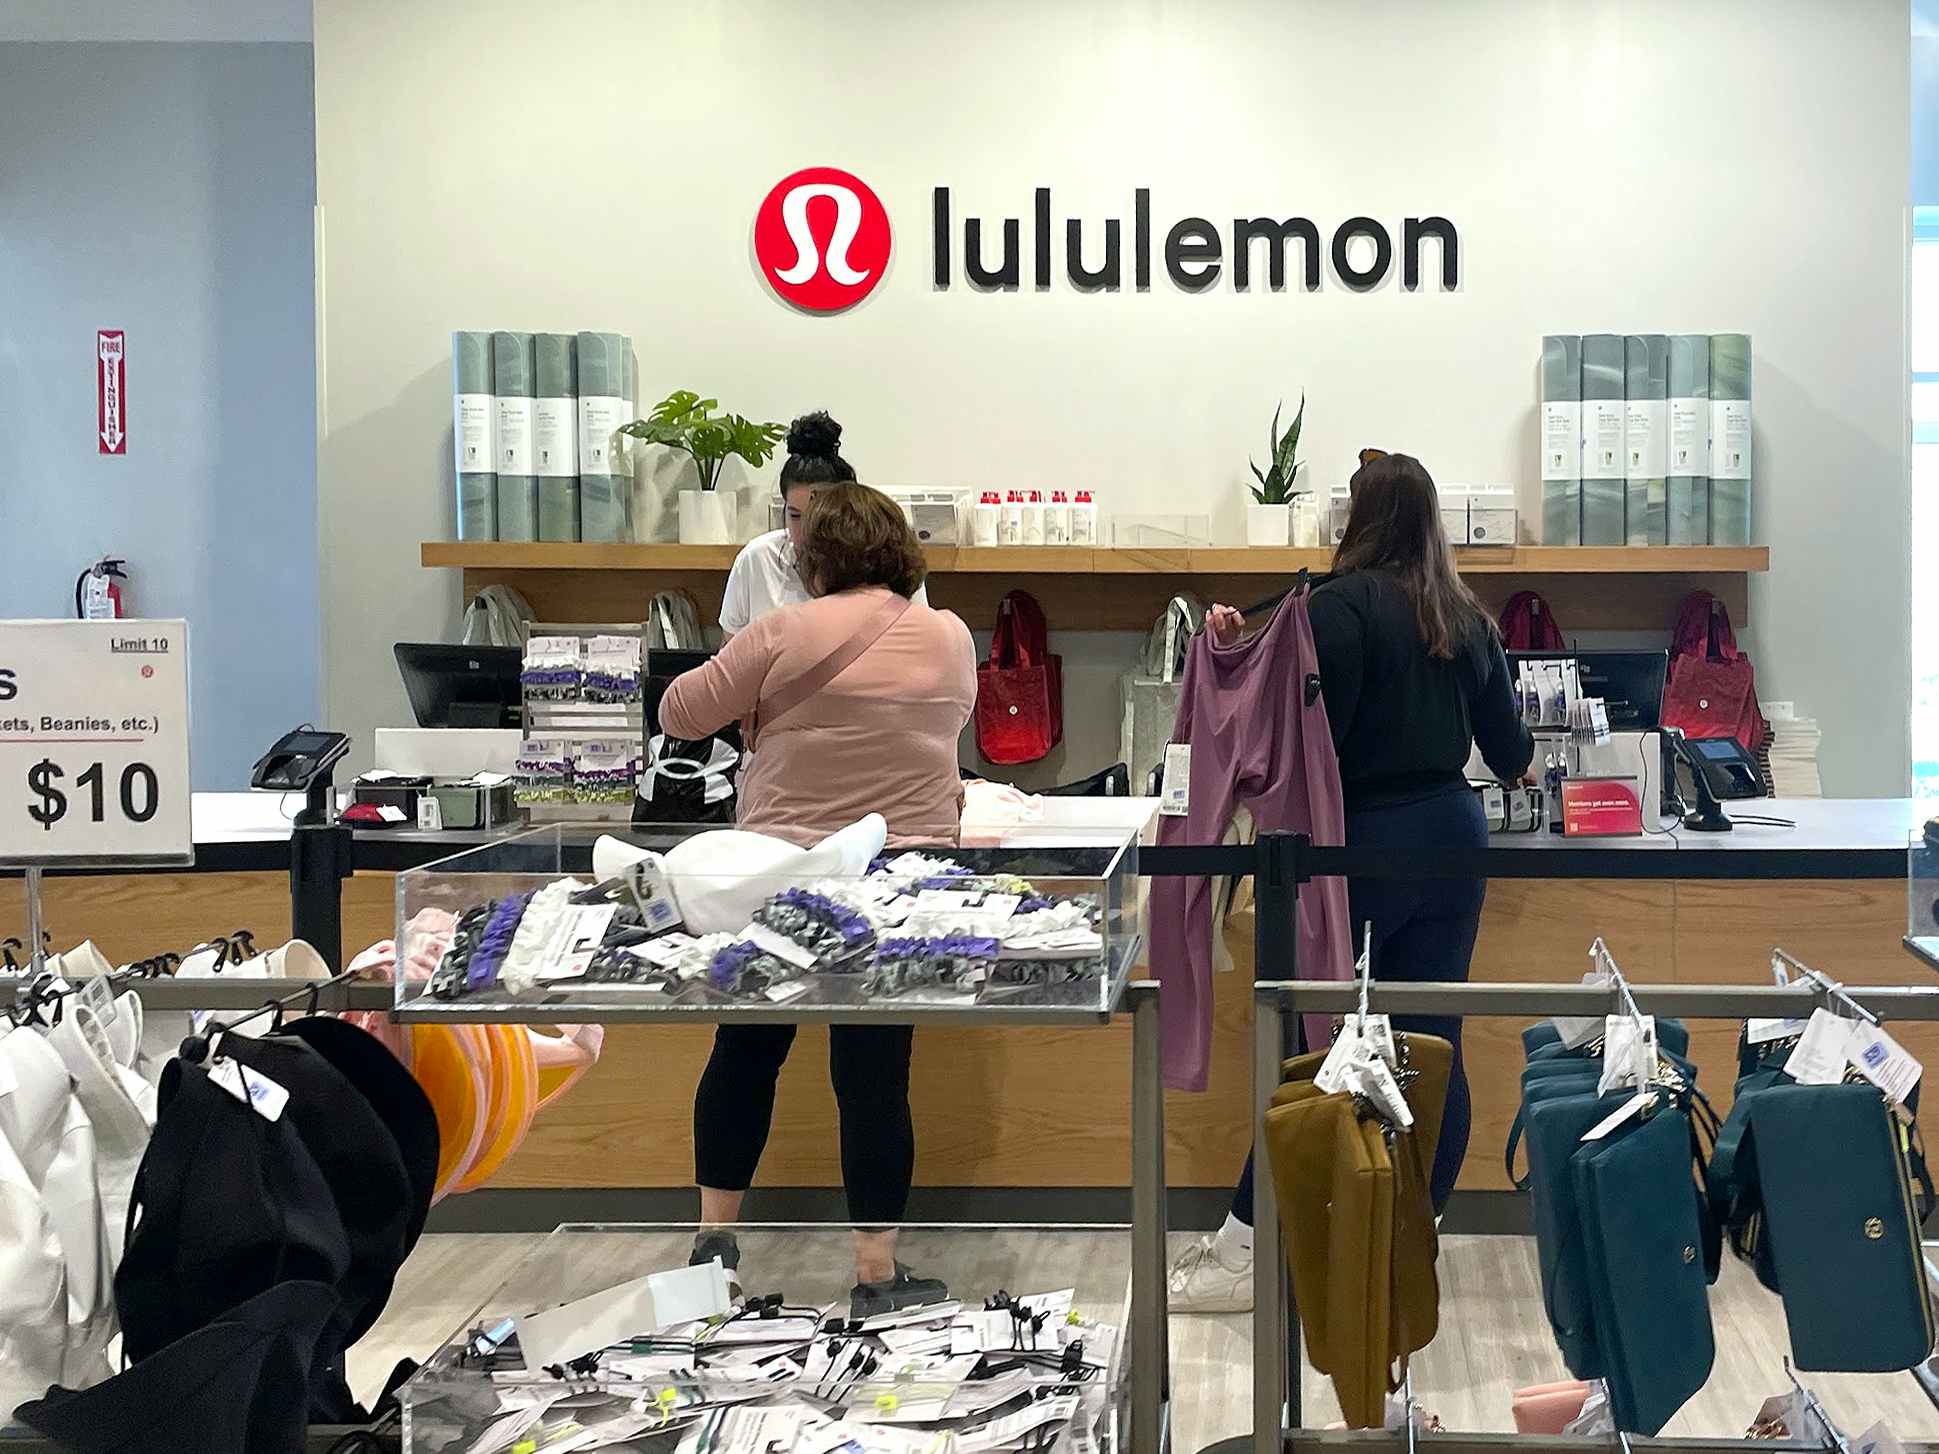 Houston Premium Outlets - #Lululemon is now open and are offering two  convenient ways to shop. Book an appt time ahead here:   OR check in at the store to receive a